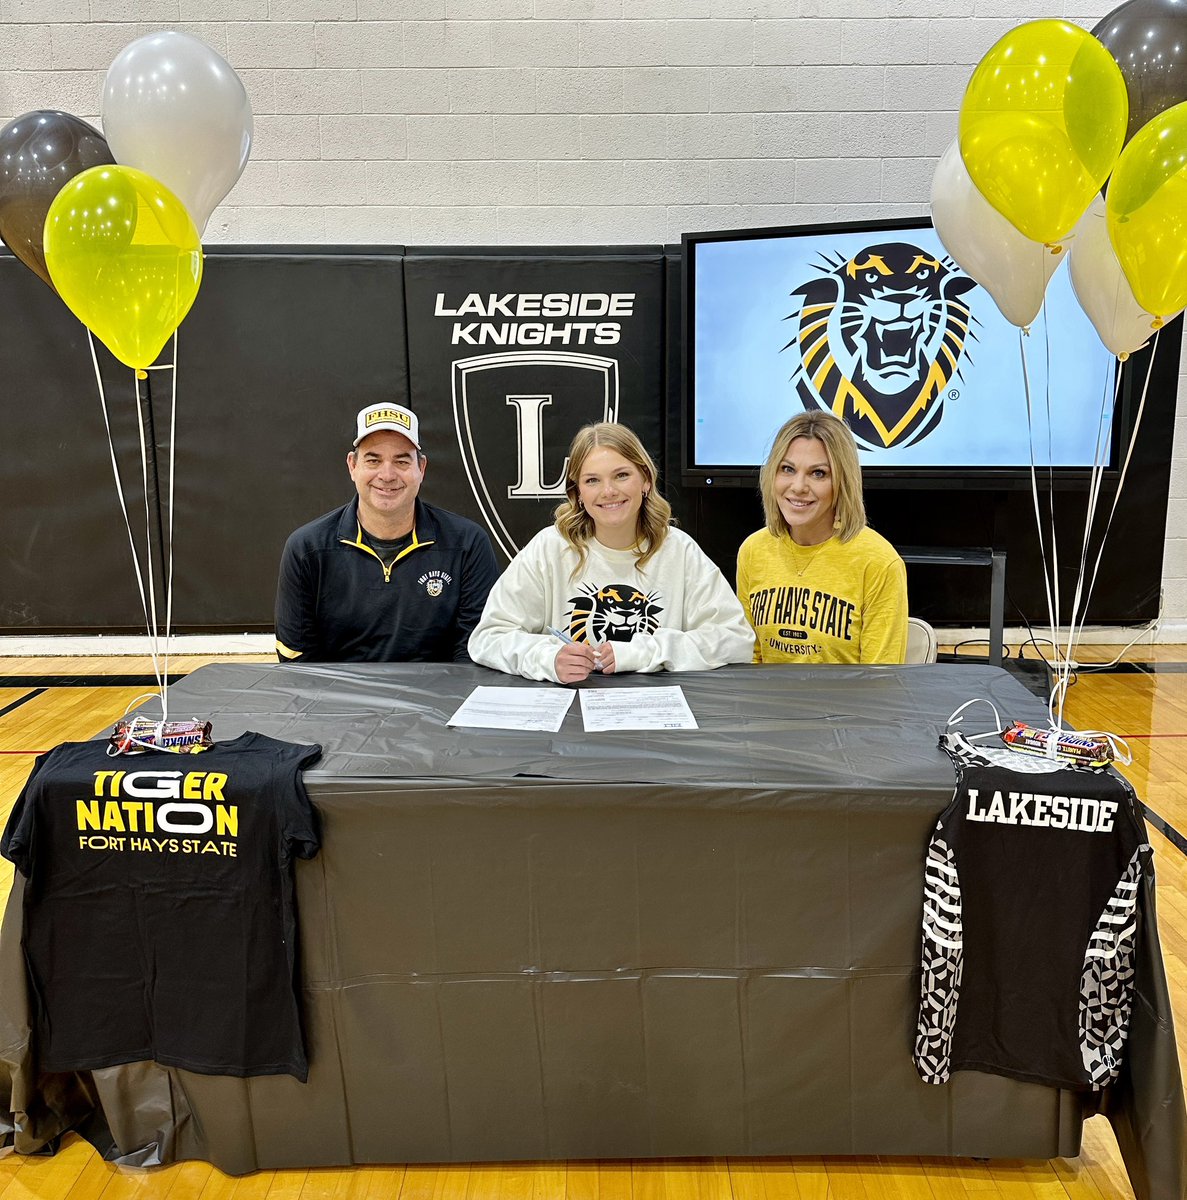 Congrats to Lauren Brummet! She has signed a Letter of Intent for Track & Field at Fort Hays State University on scholarship. Lauren is a 6-time KSHSAA State Track & Field medalist and a 3 sport athlete with multiple state honors. @dusty40 @ncksradioguy10 @sportsinkansas